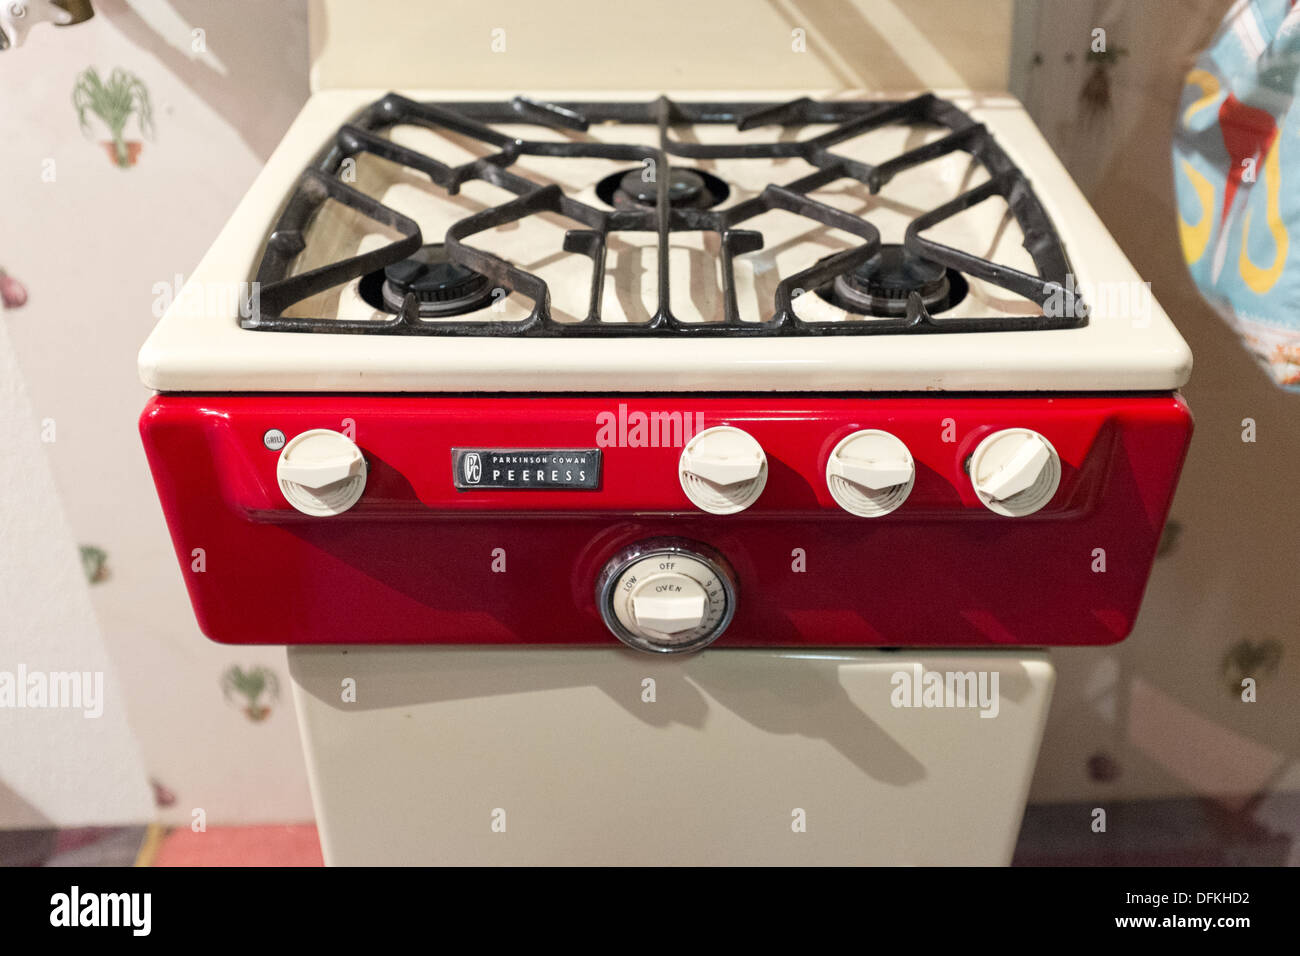 Gas Cooker 1950s High Resolution Stock Photography and Images - Alamy